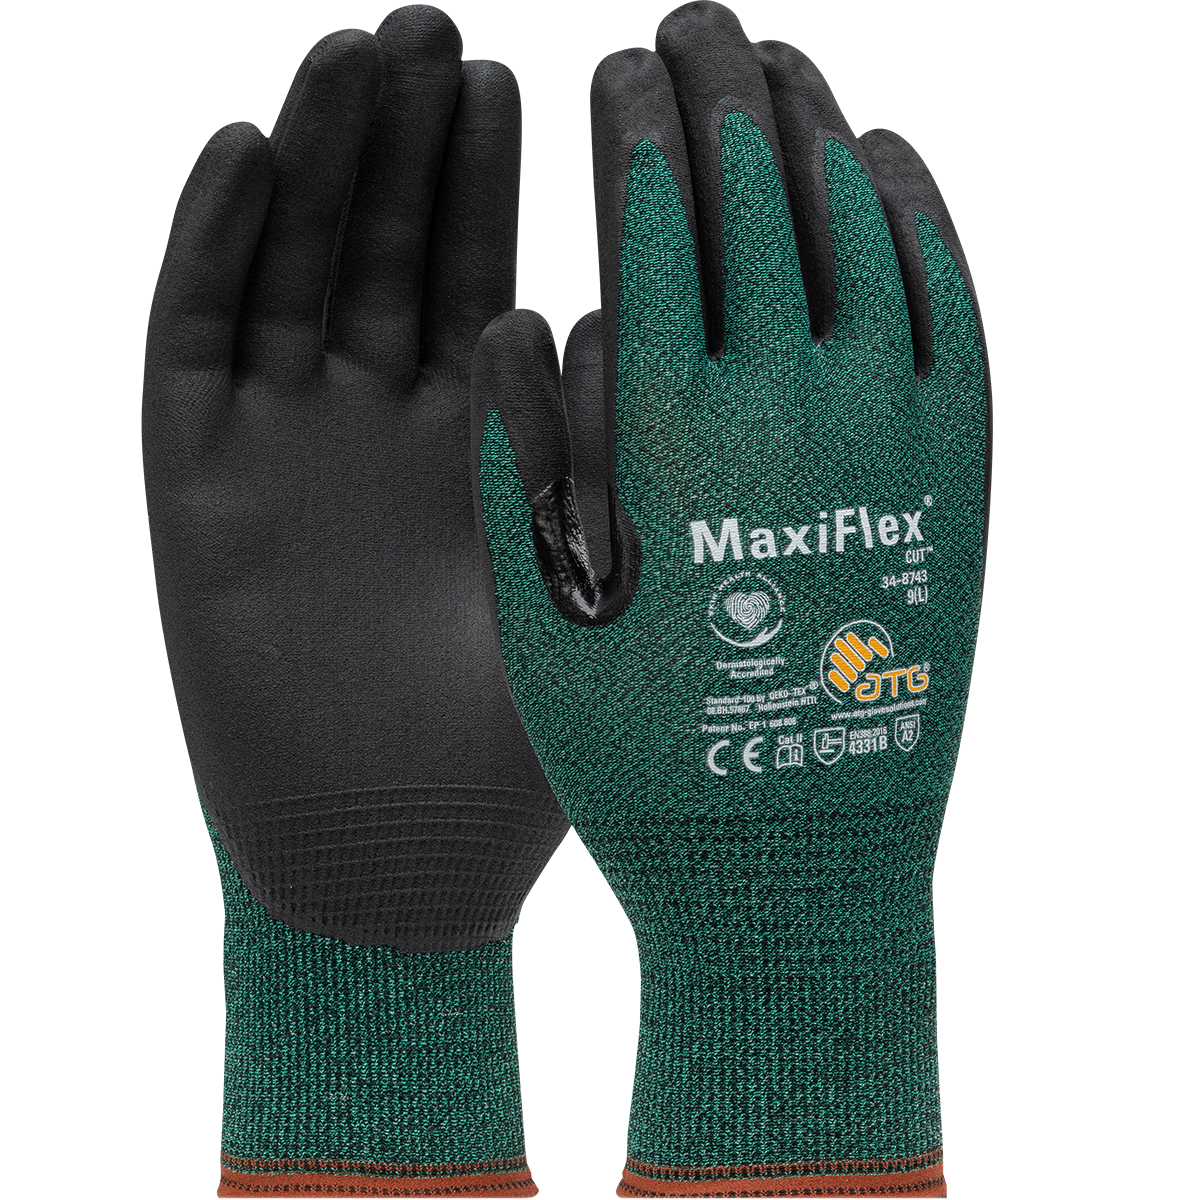 PIP MaxiFlex Seamless Knit Nitrile Coated Palm Gloves - Utility and Pocket Knives